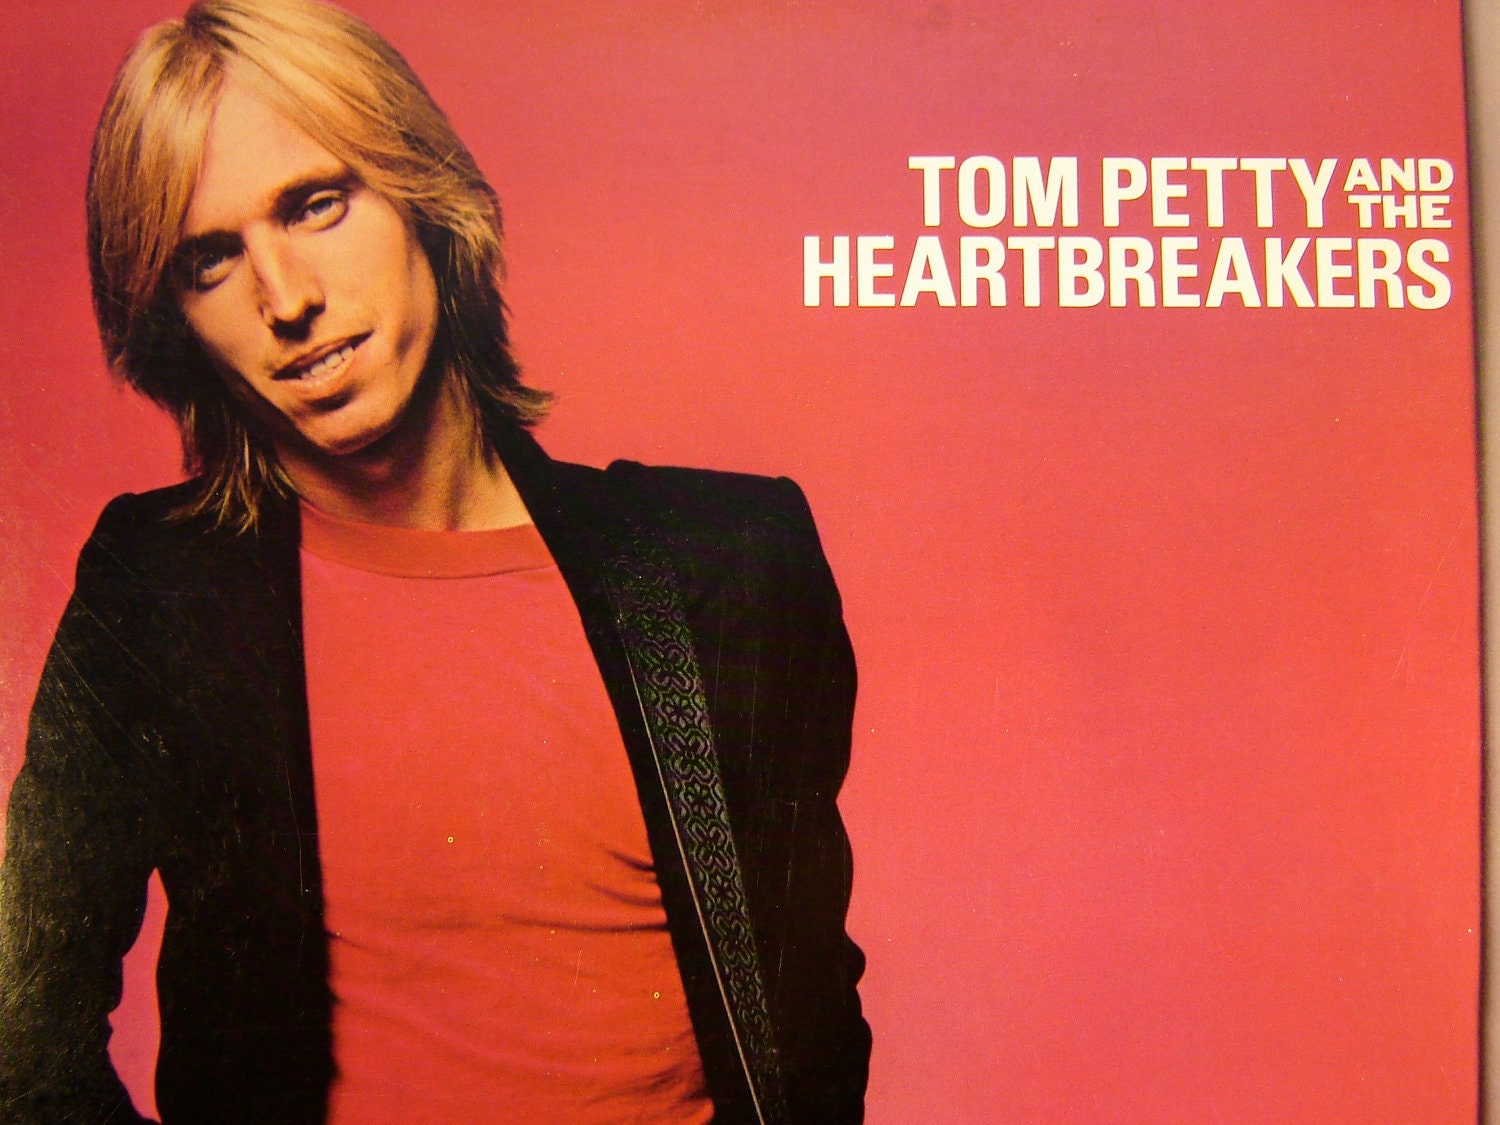 Image result for tom petty